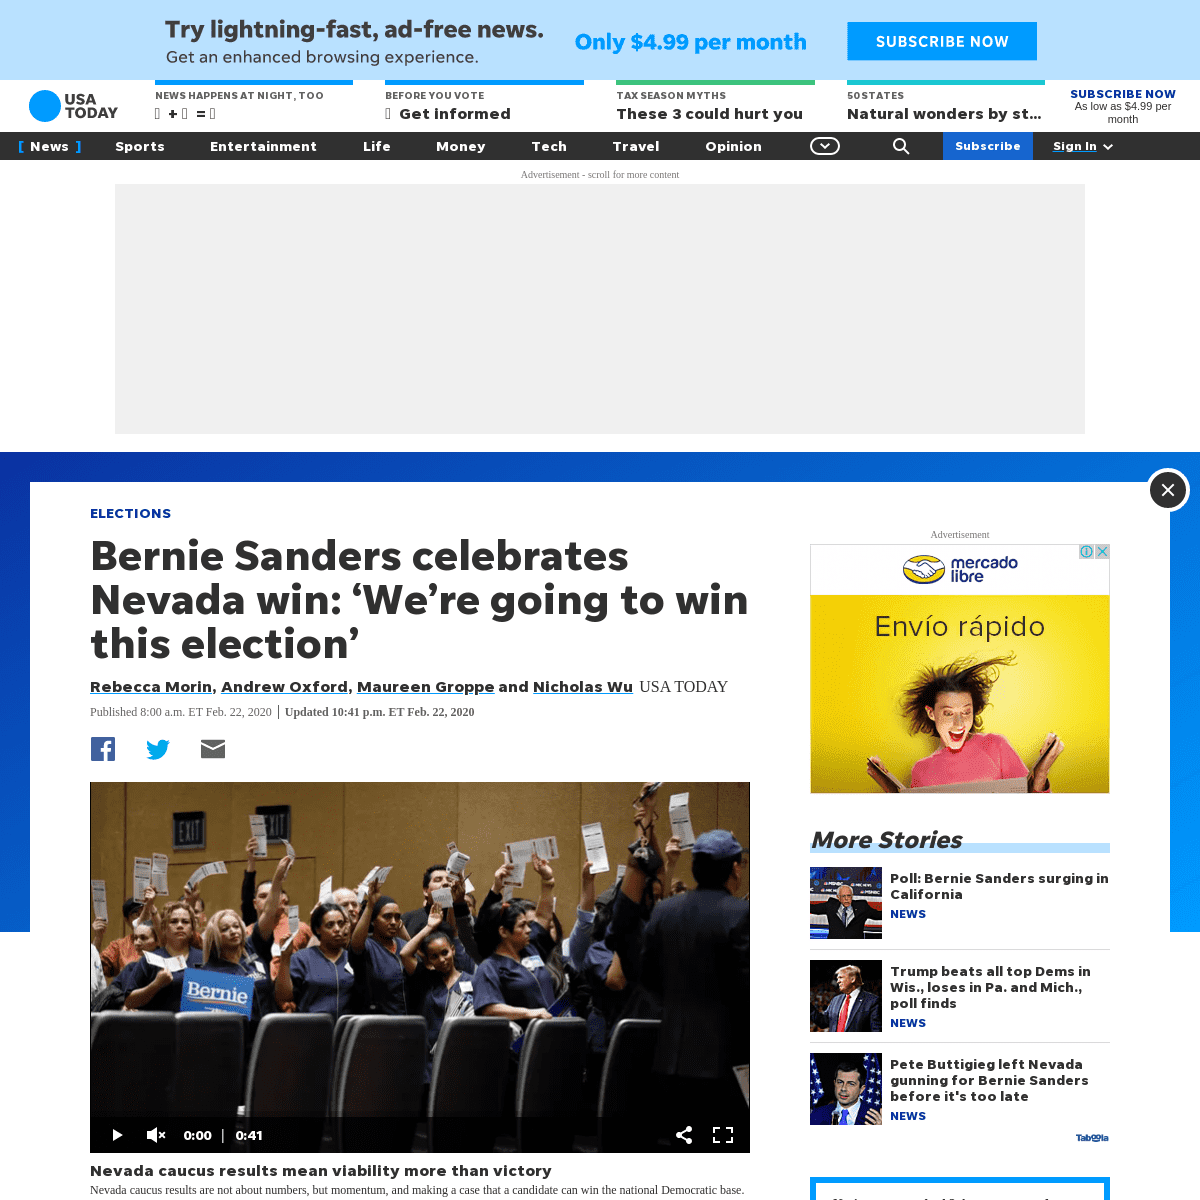 A complete backup of www.usatoday.com/story/news/politics/elections/2020/02/22/nevada-caucuses-bernie-sanders-democrats-look-kee